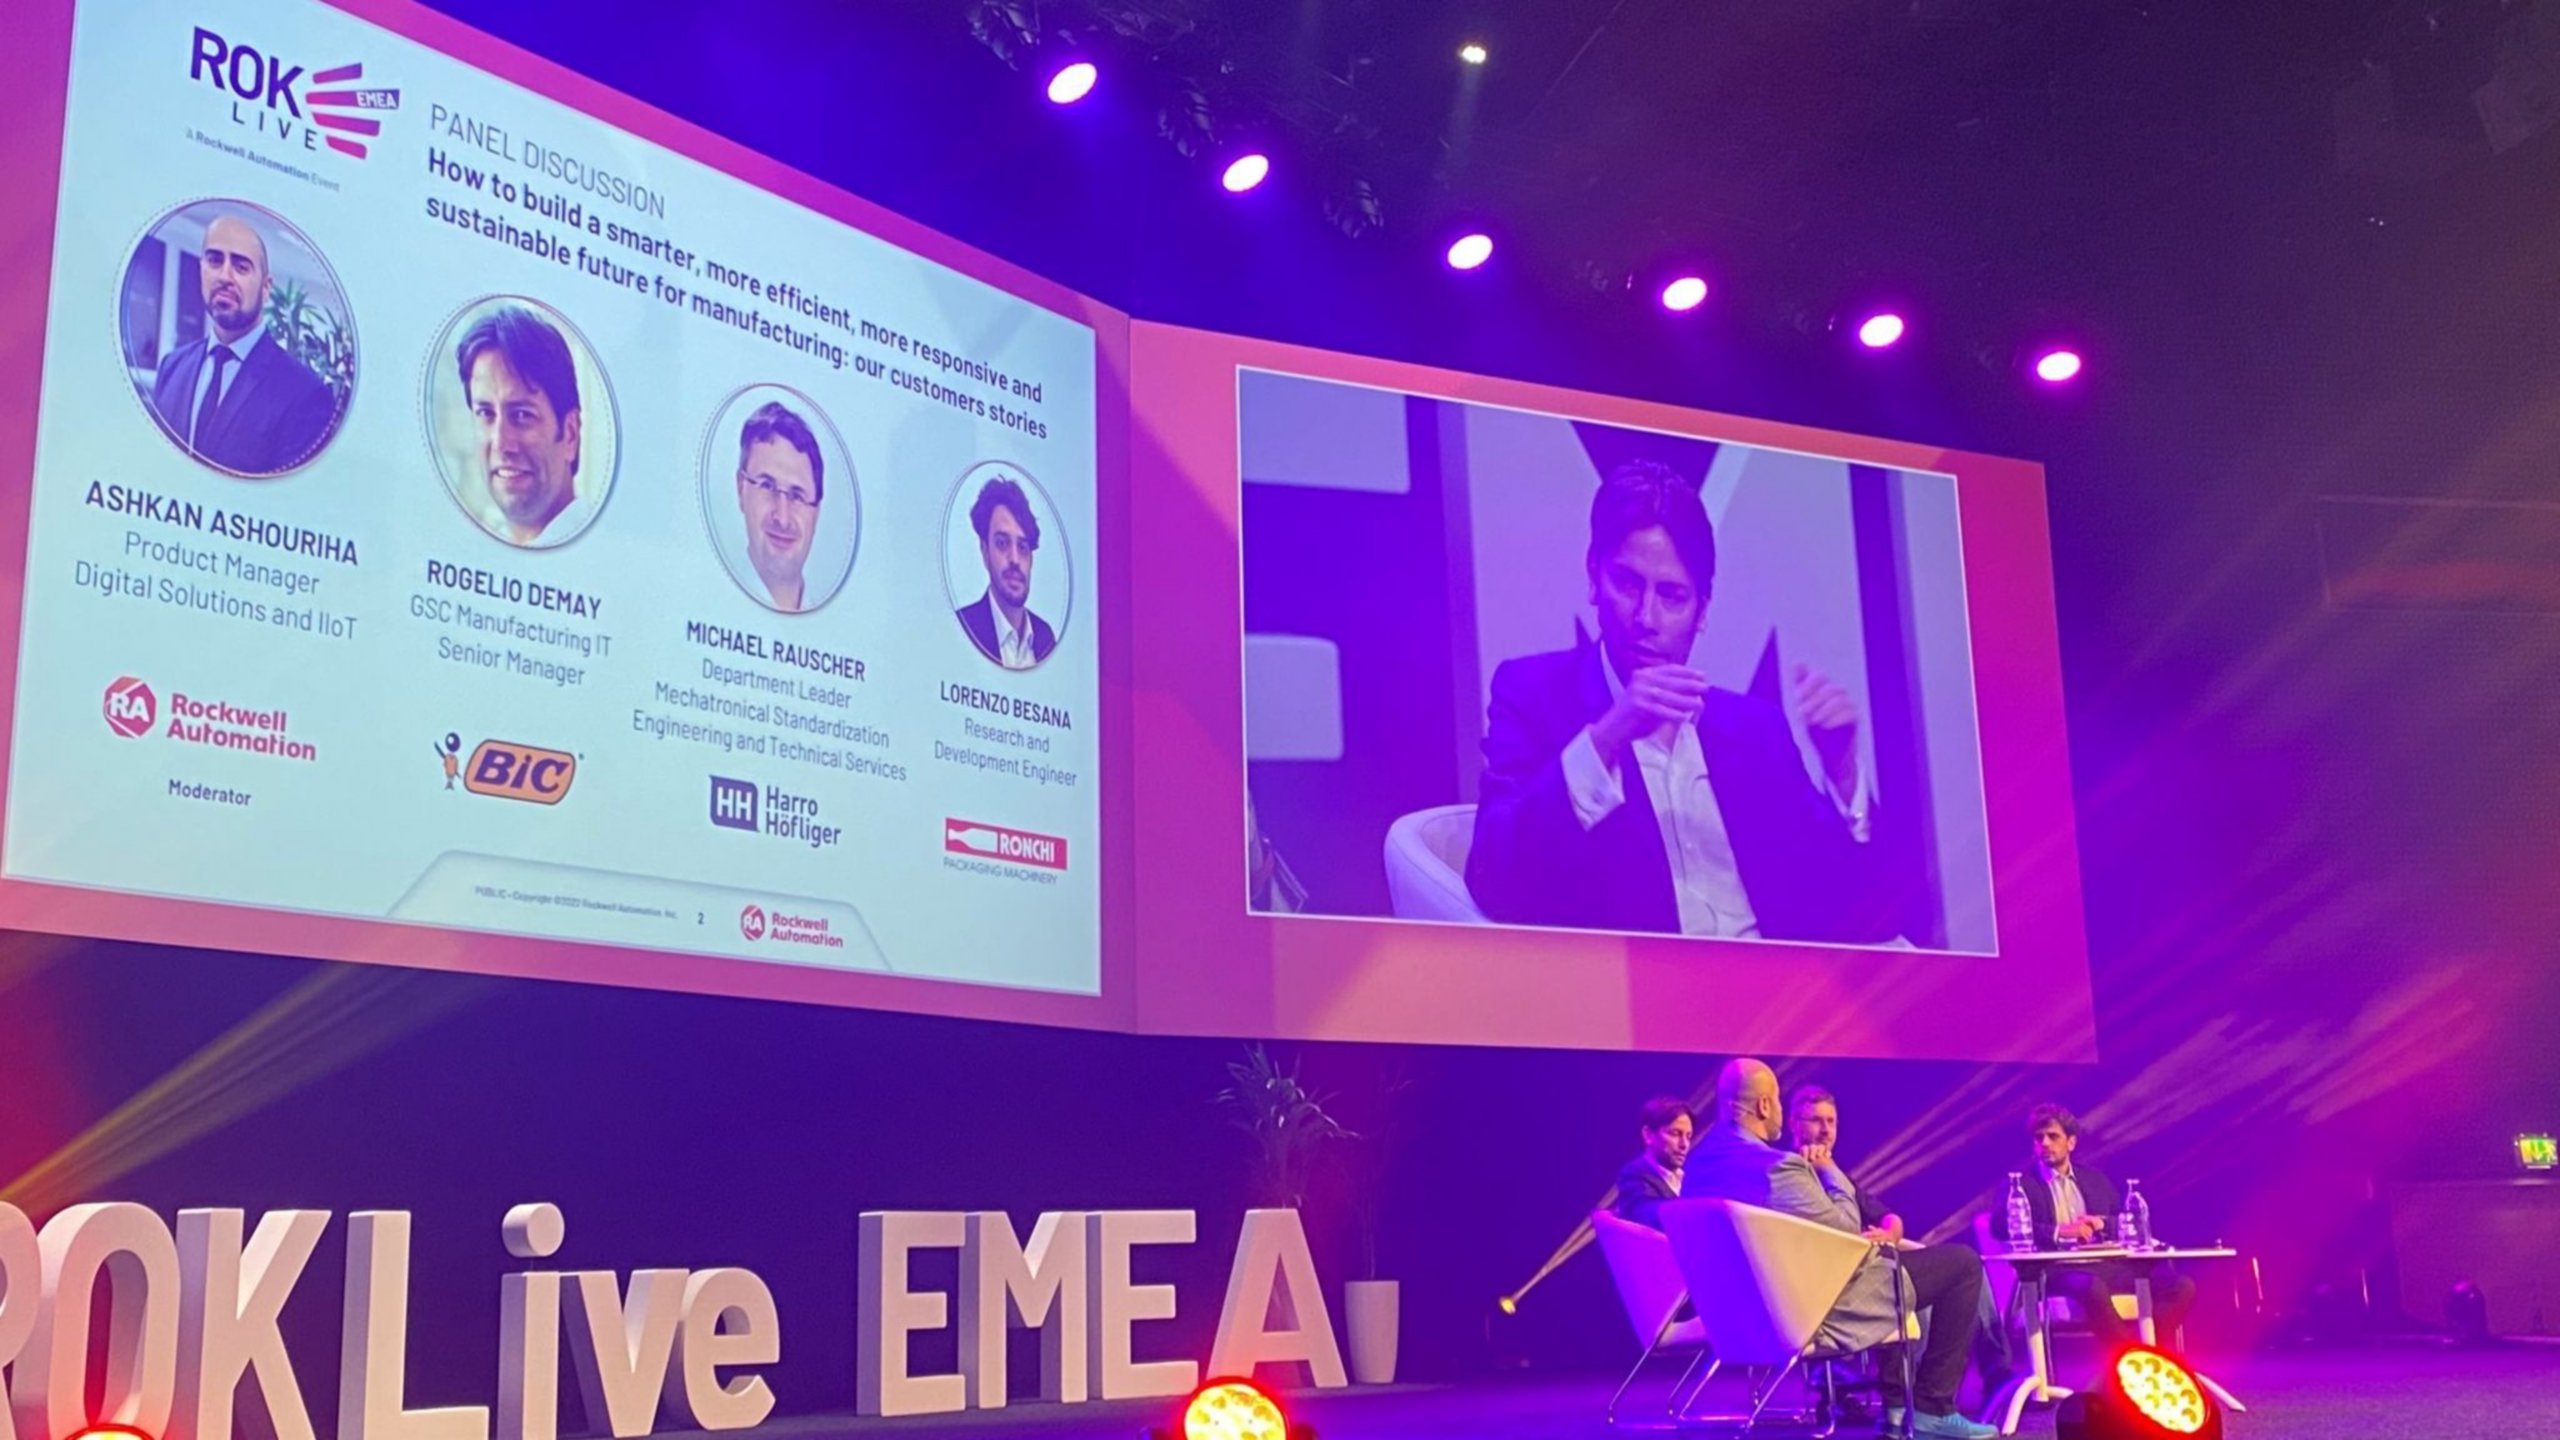 Keynote Speakers talking during ROKLive EMEA Panel Discussion